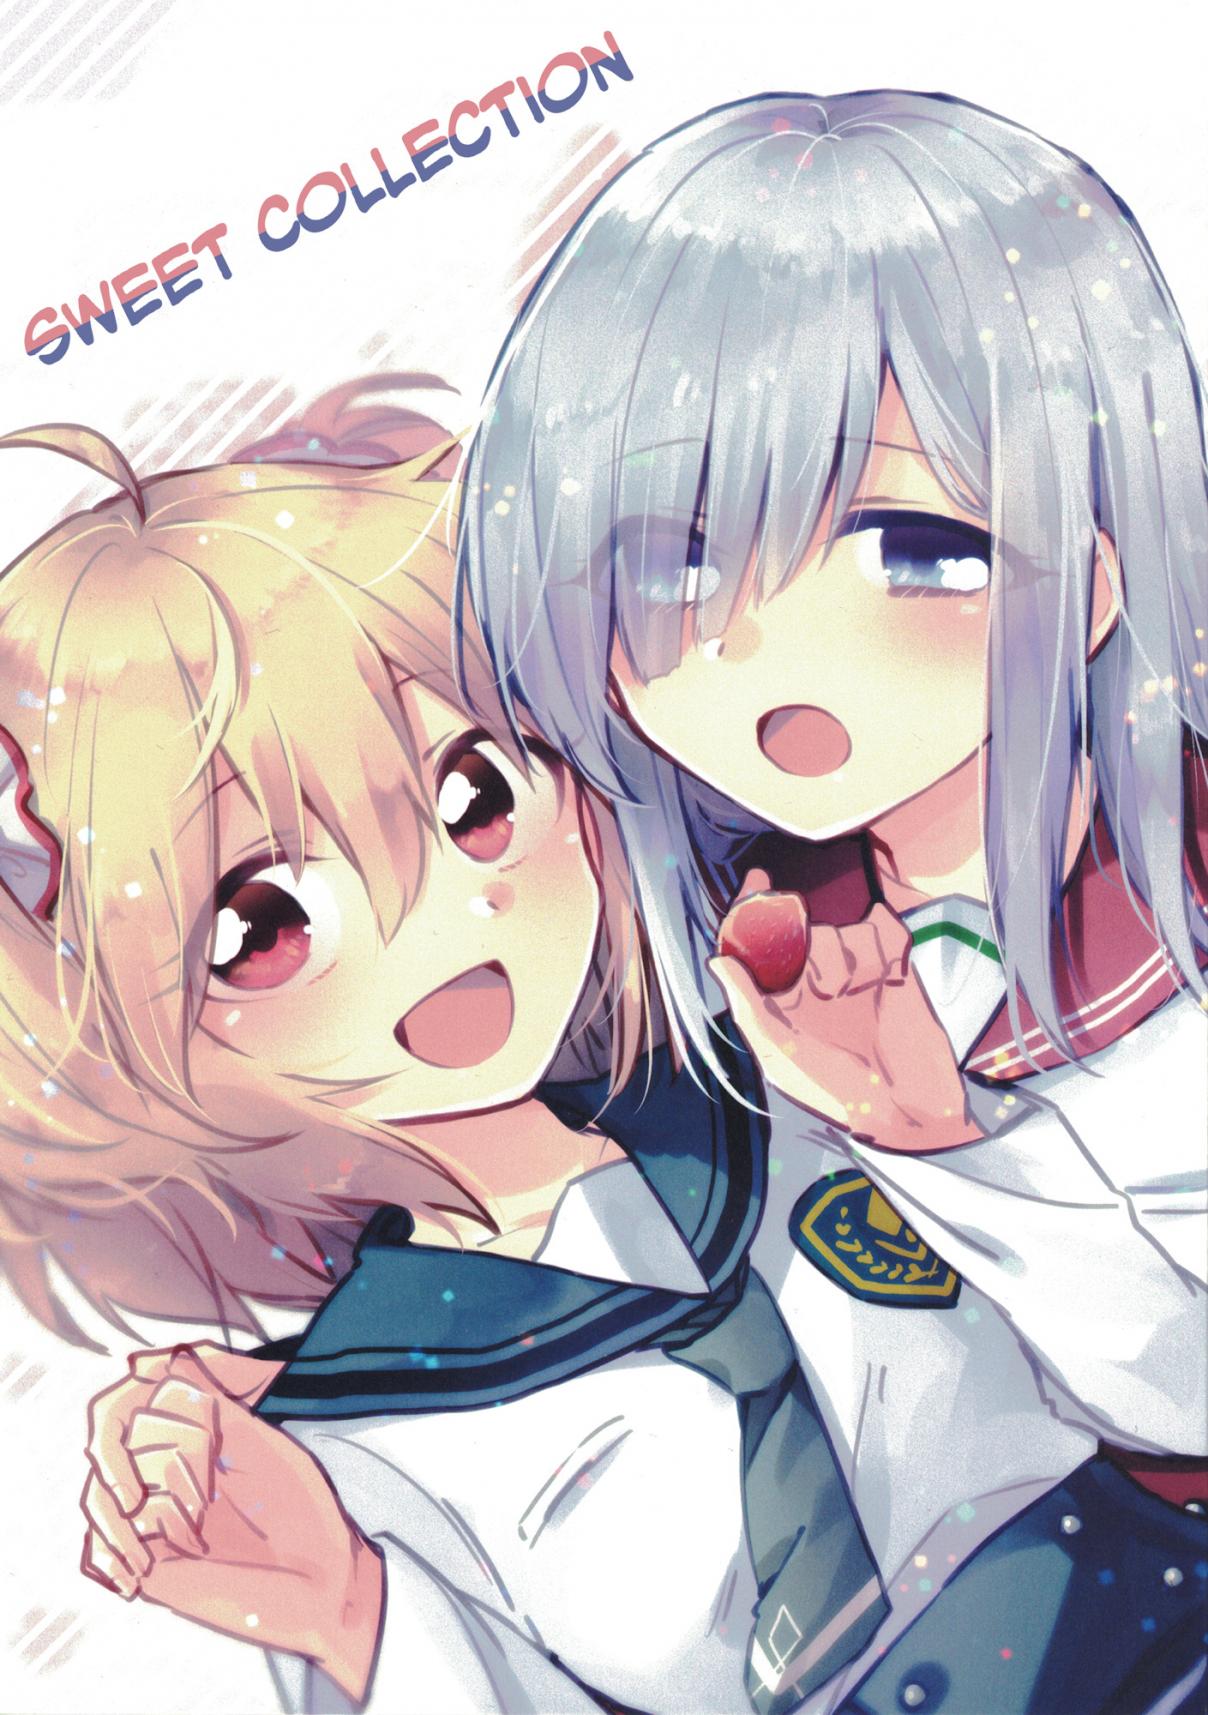 Sweet Collection Vol. 1 Ch. 1 Oneshot